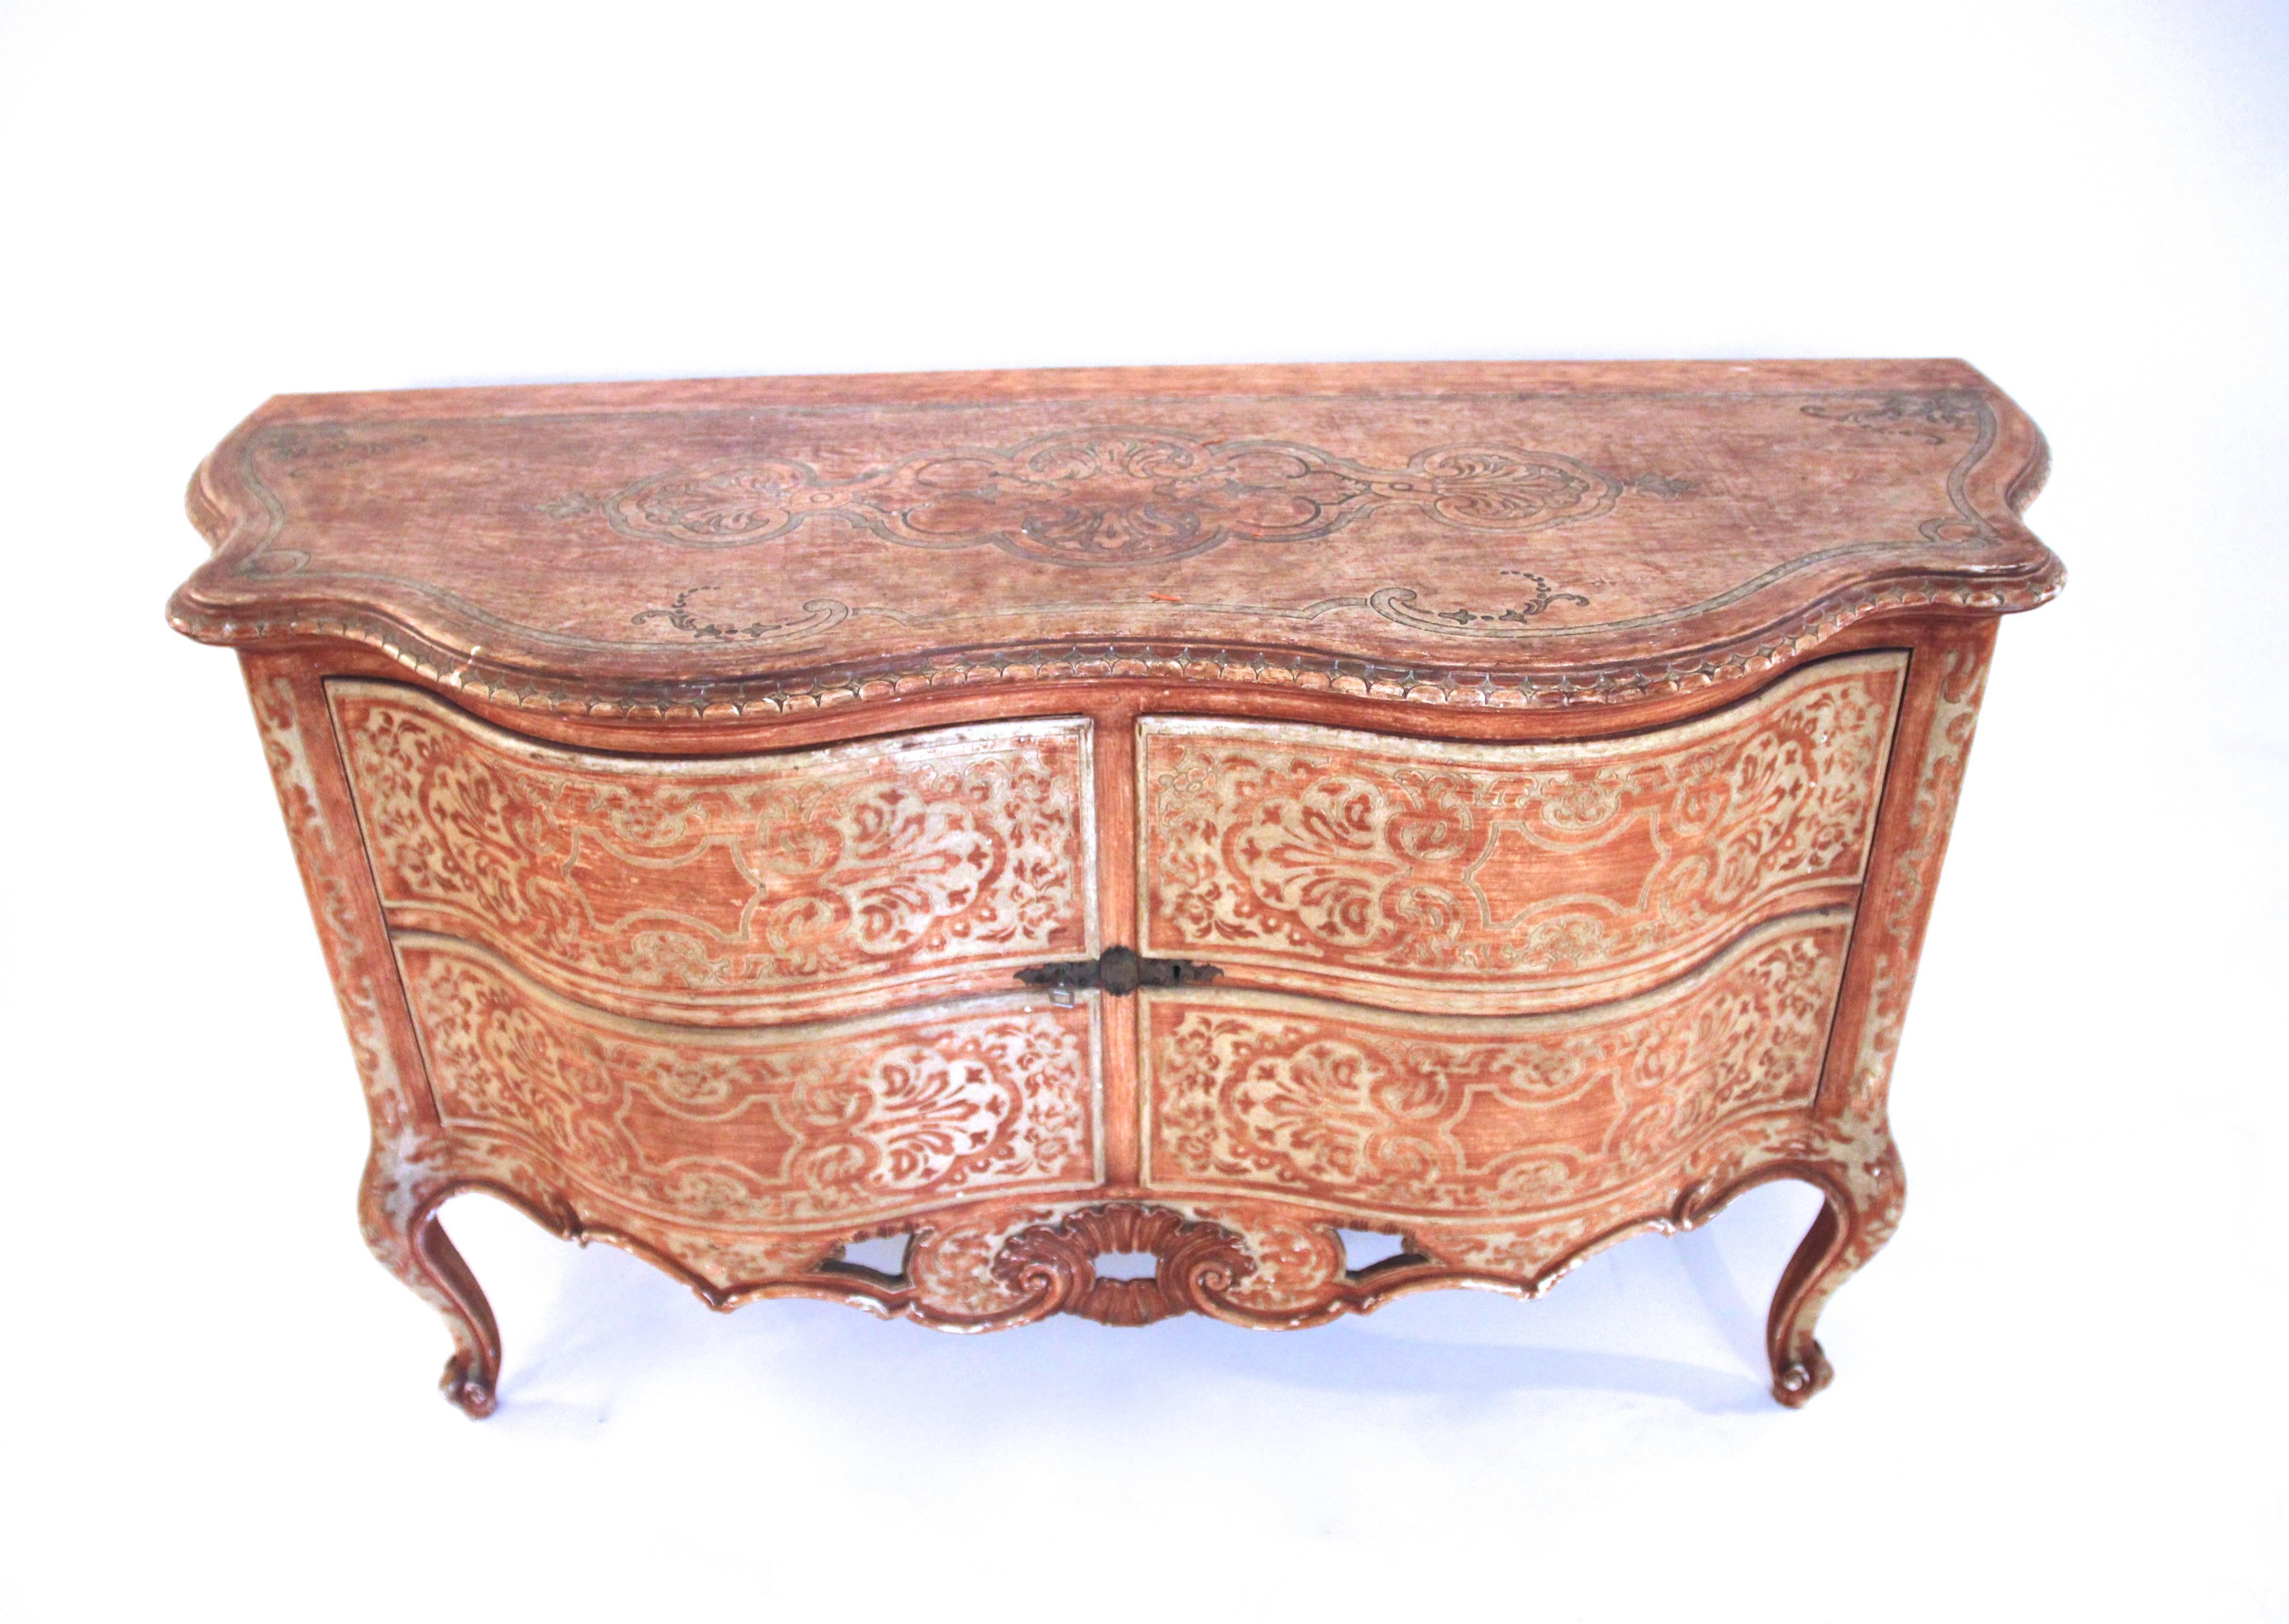 Sideboard with two drawers,
wood structure, with decor painted in the Venetian style
circa 1960, Italy.
Measures: Height 83 cm, width 150 cm, depth 58 cm.